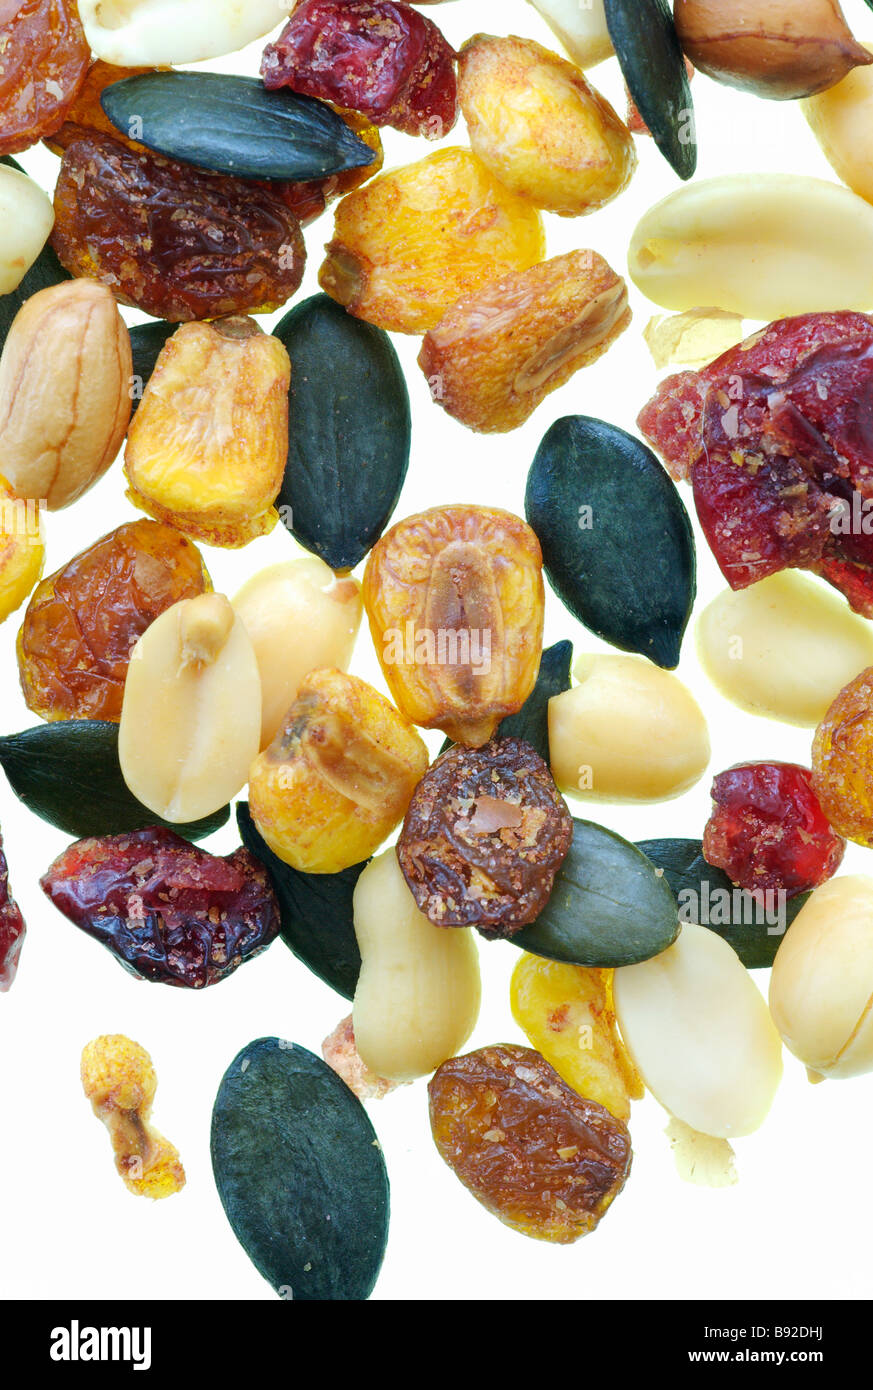 Dried fruit and nut mix a popular and typical South African Snack Studio Shot Stock Photo